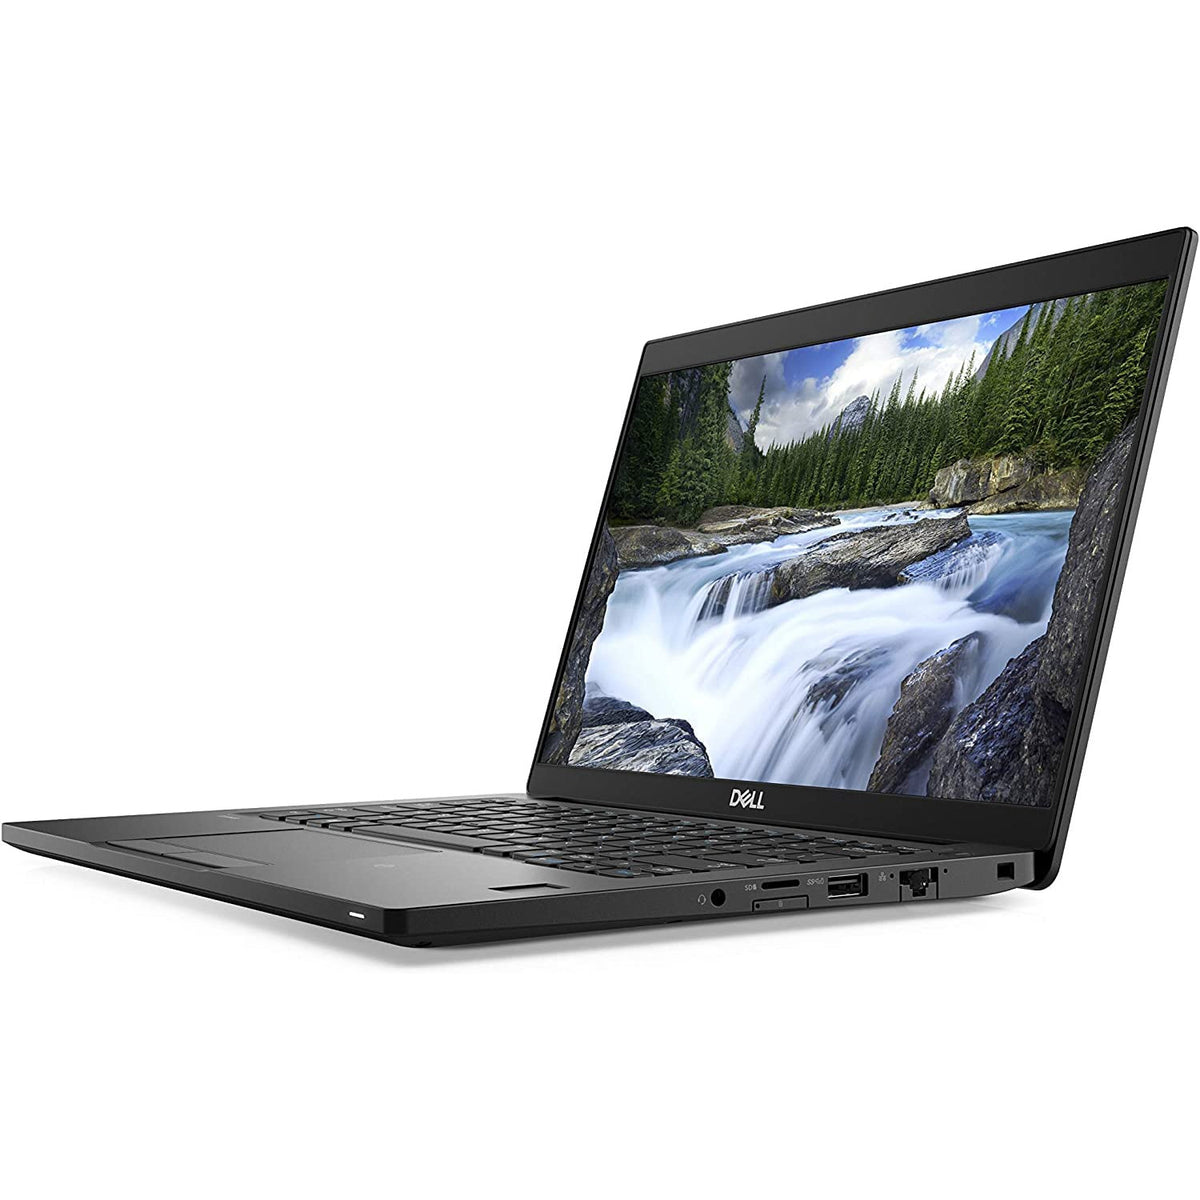 Discount PC - Right-side view of Dell Latitude 7390 Laptop